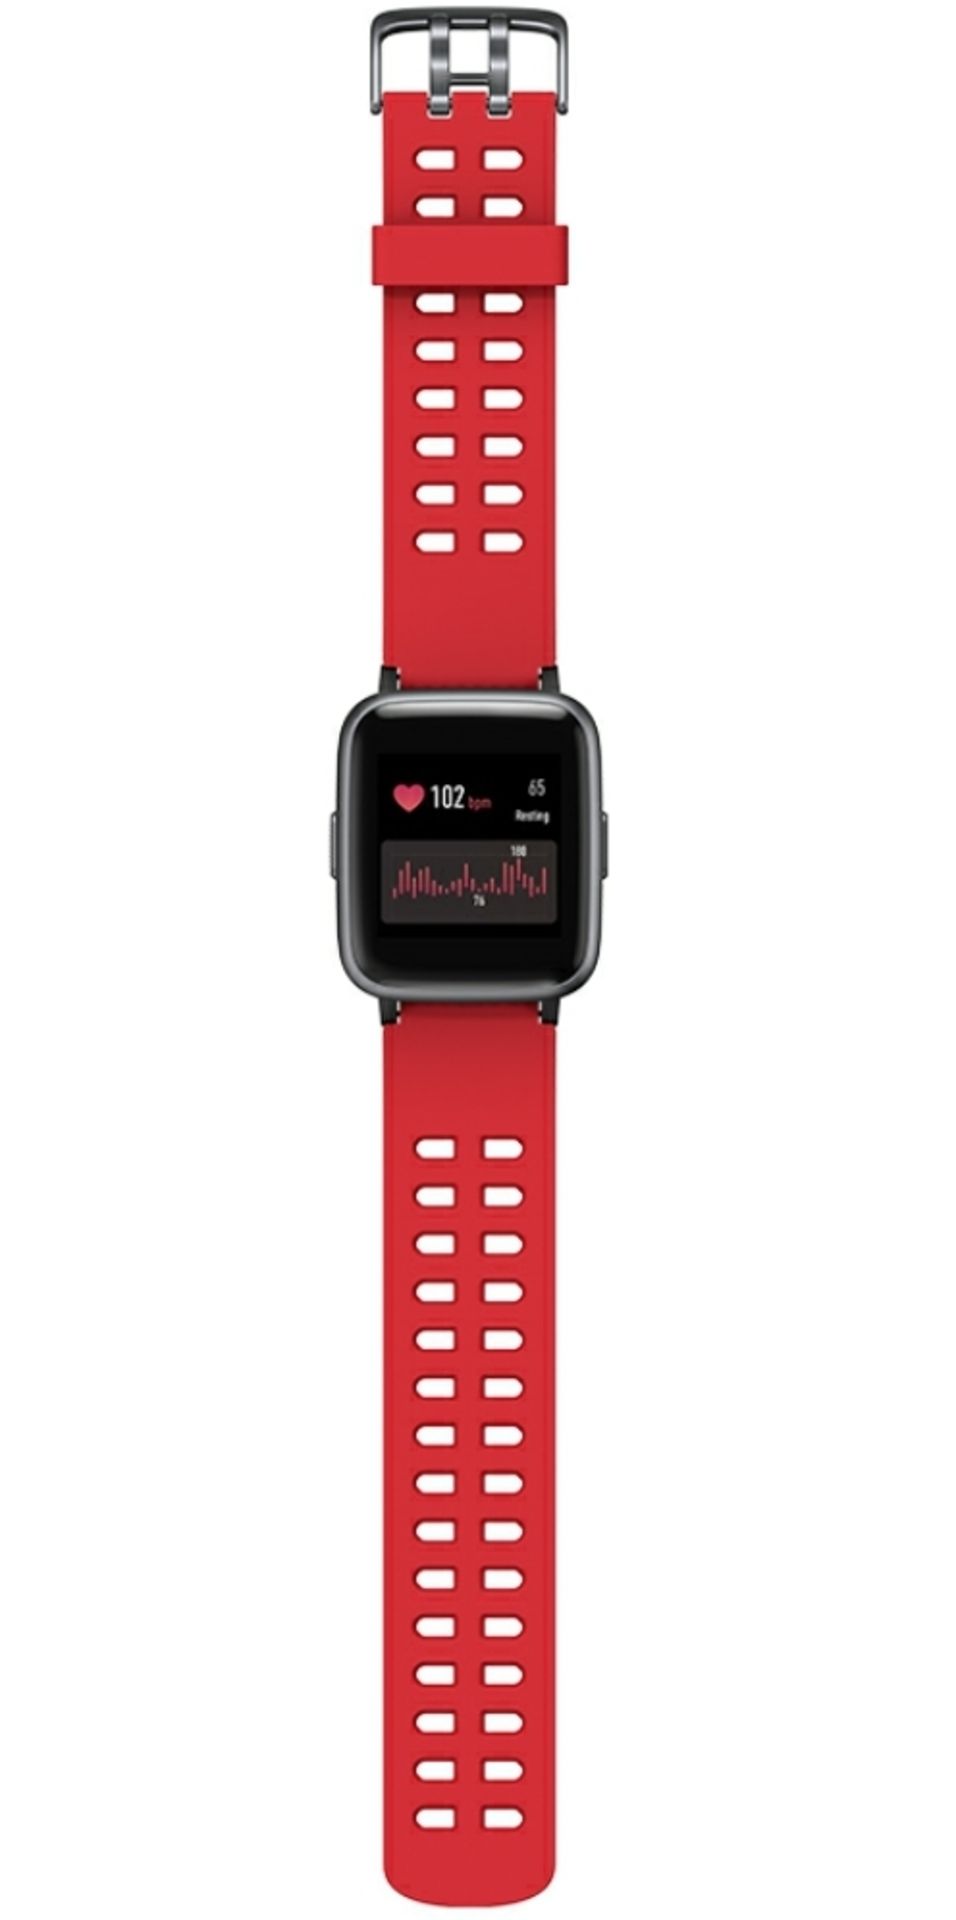 Brand New Unisex Fitness Tracker Watch ID205 Red Strap - Image 11 of 34